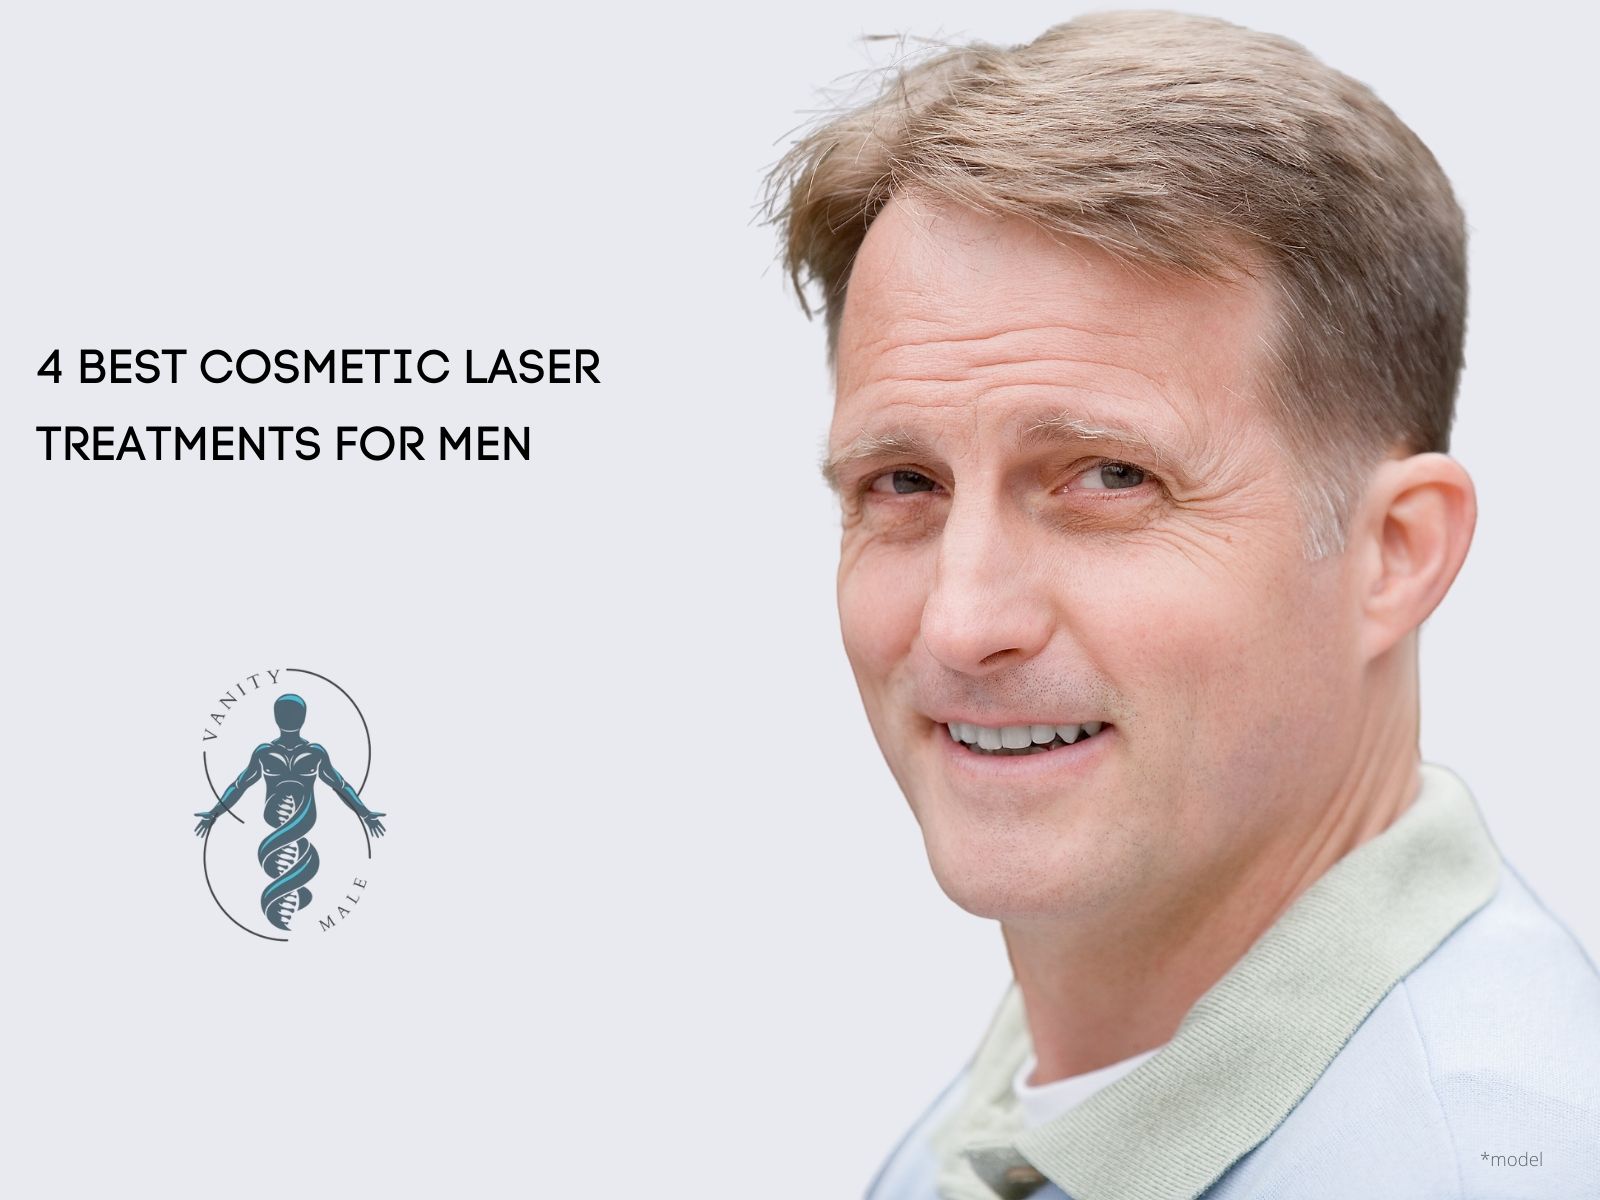 4 Best Cosmetic Laser Treatments for Men